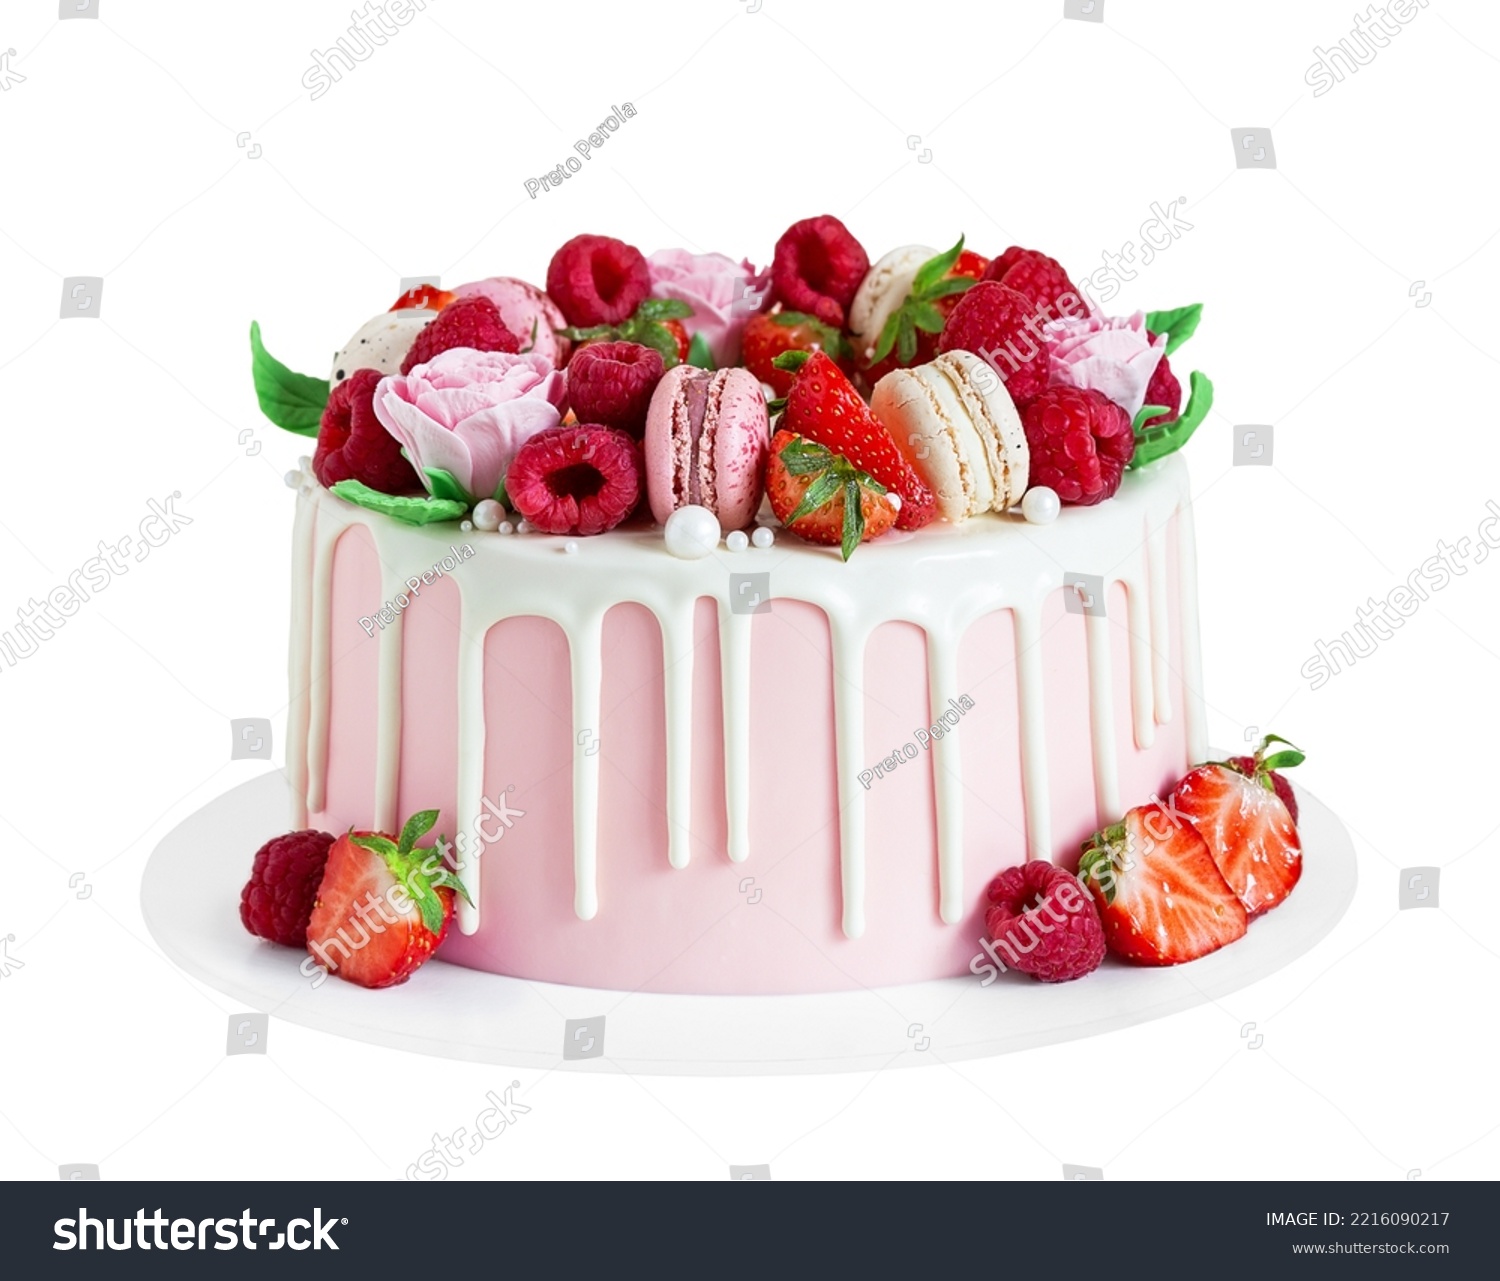 Birthday sweet cake with berries, macaron and floral decor isolated on a white background. Beautiful pink cake decorated with macarons, raspberries, strawberries and sugar rose flowers.  #2216090217